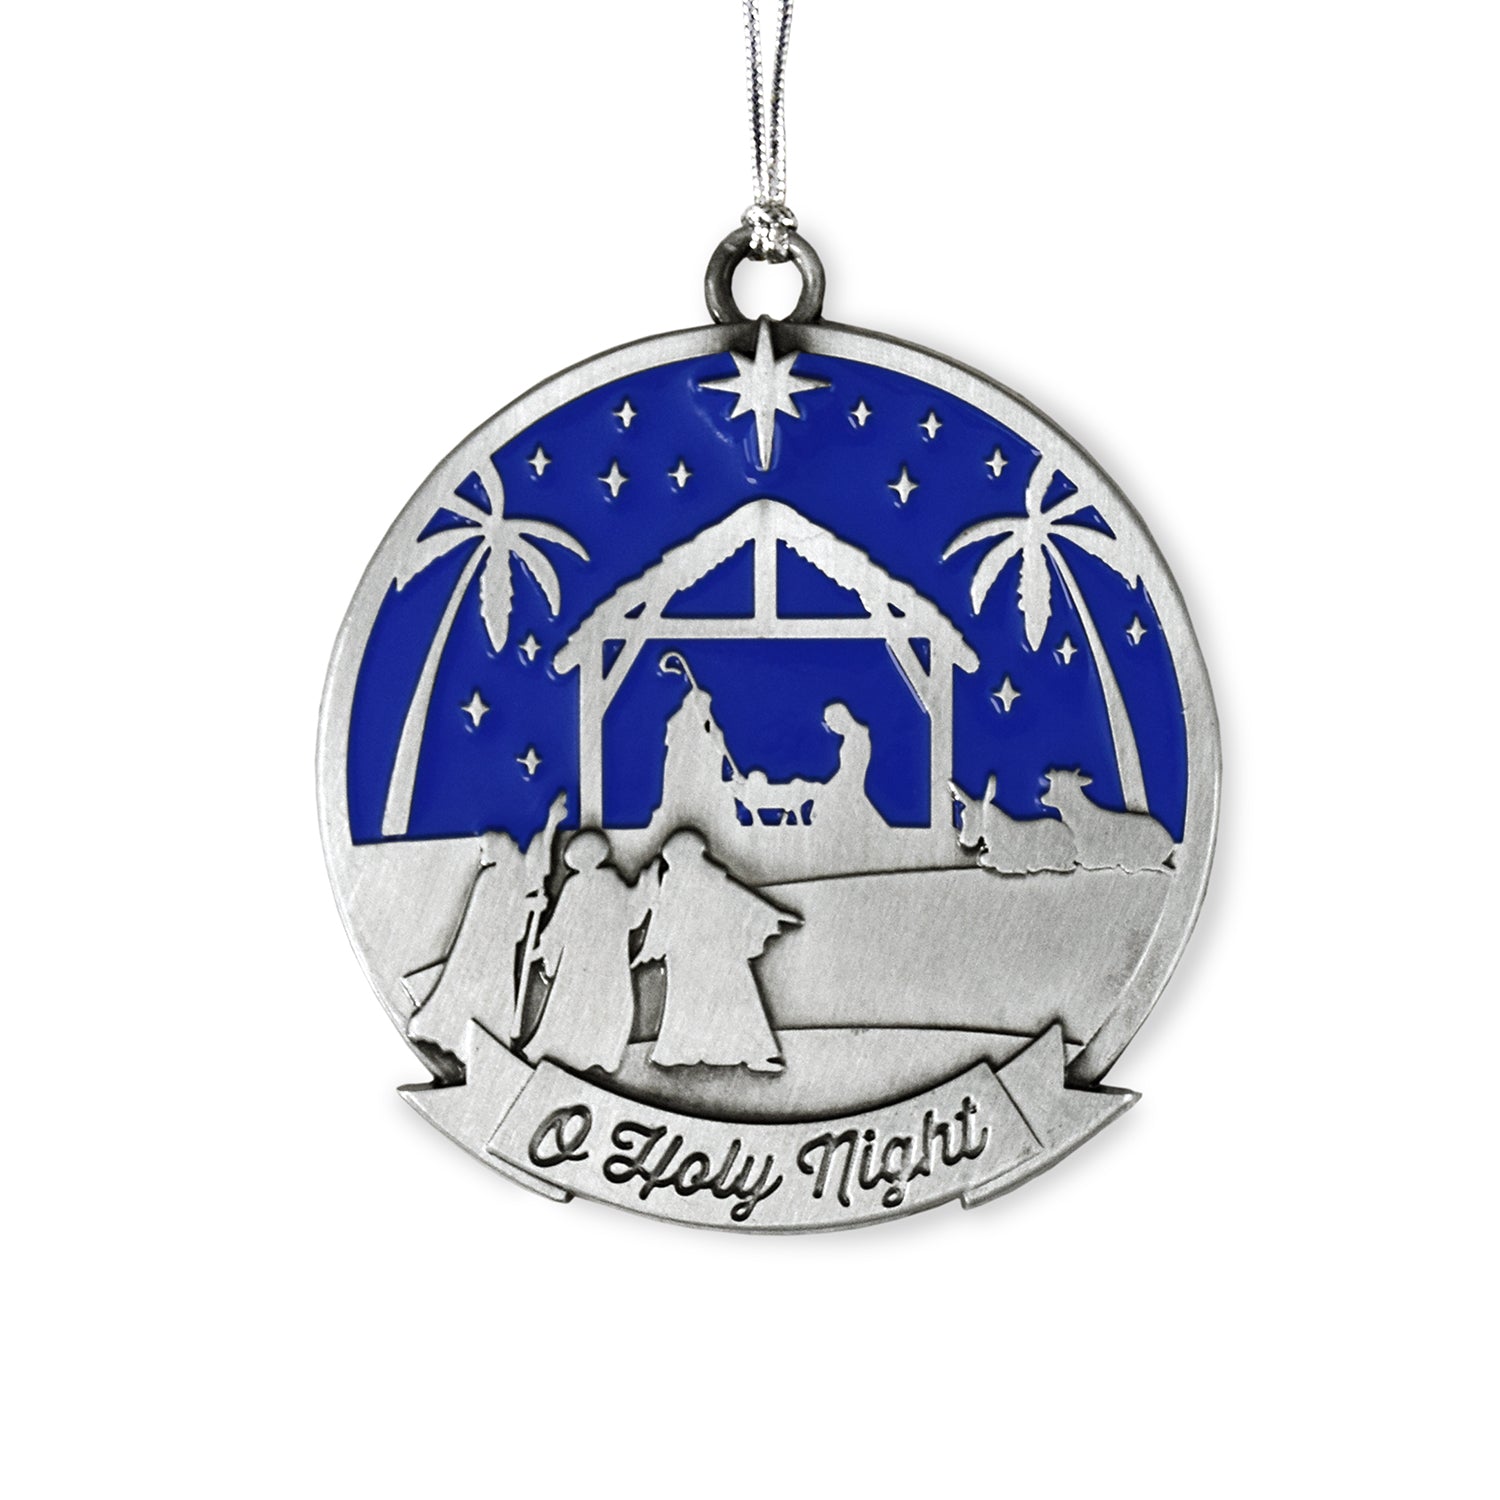 Oh Holy Night Ornament